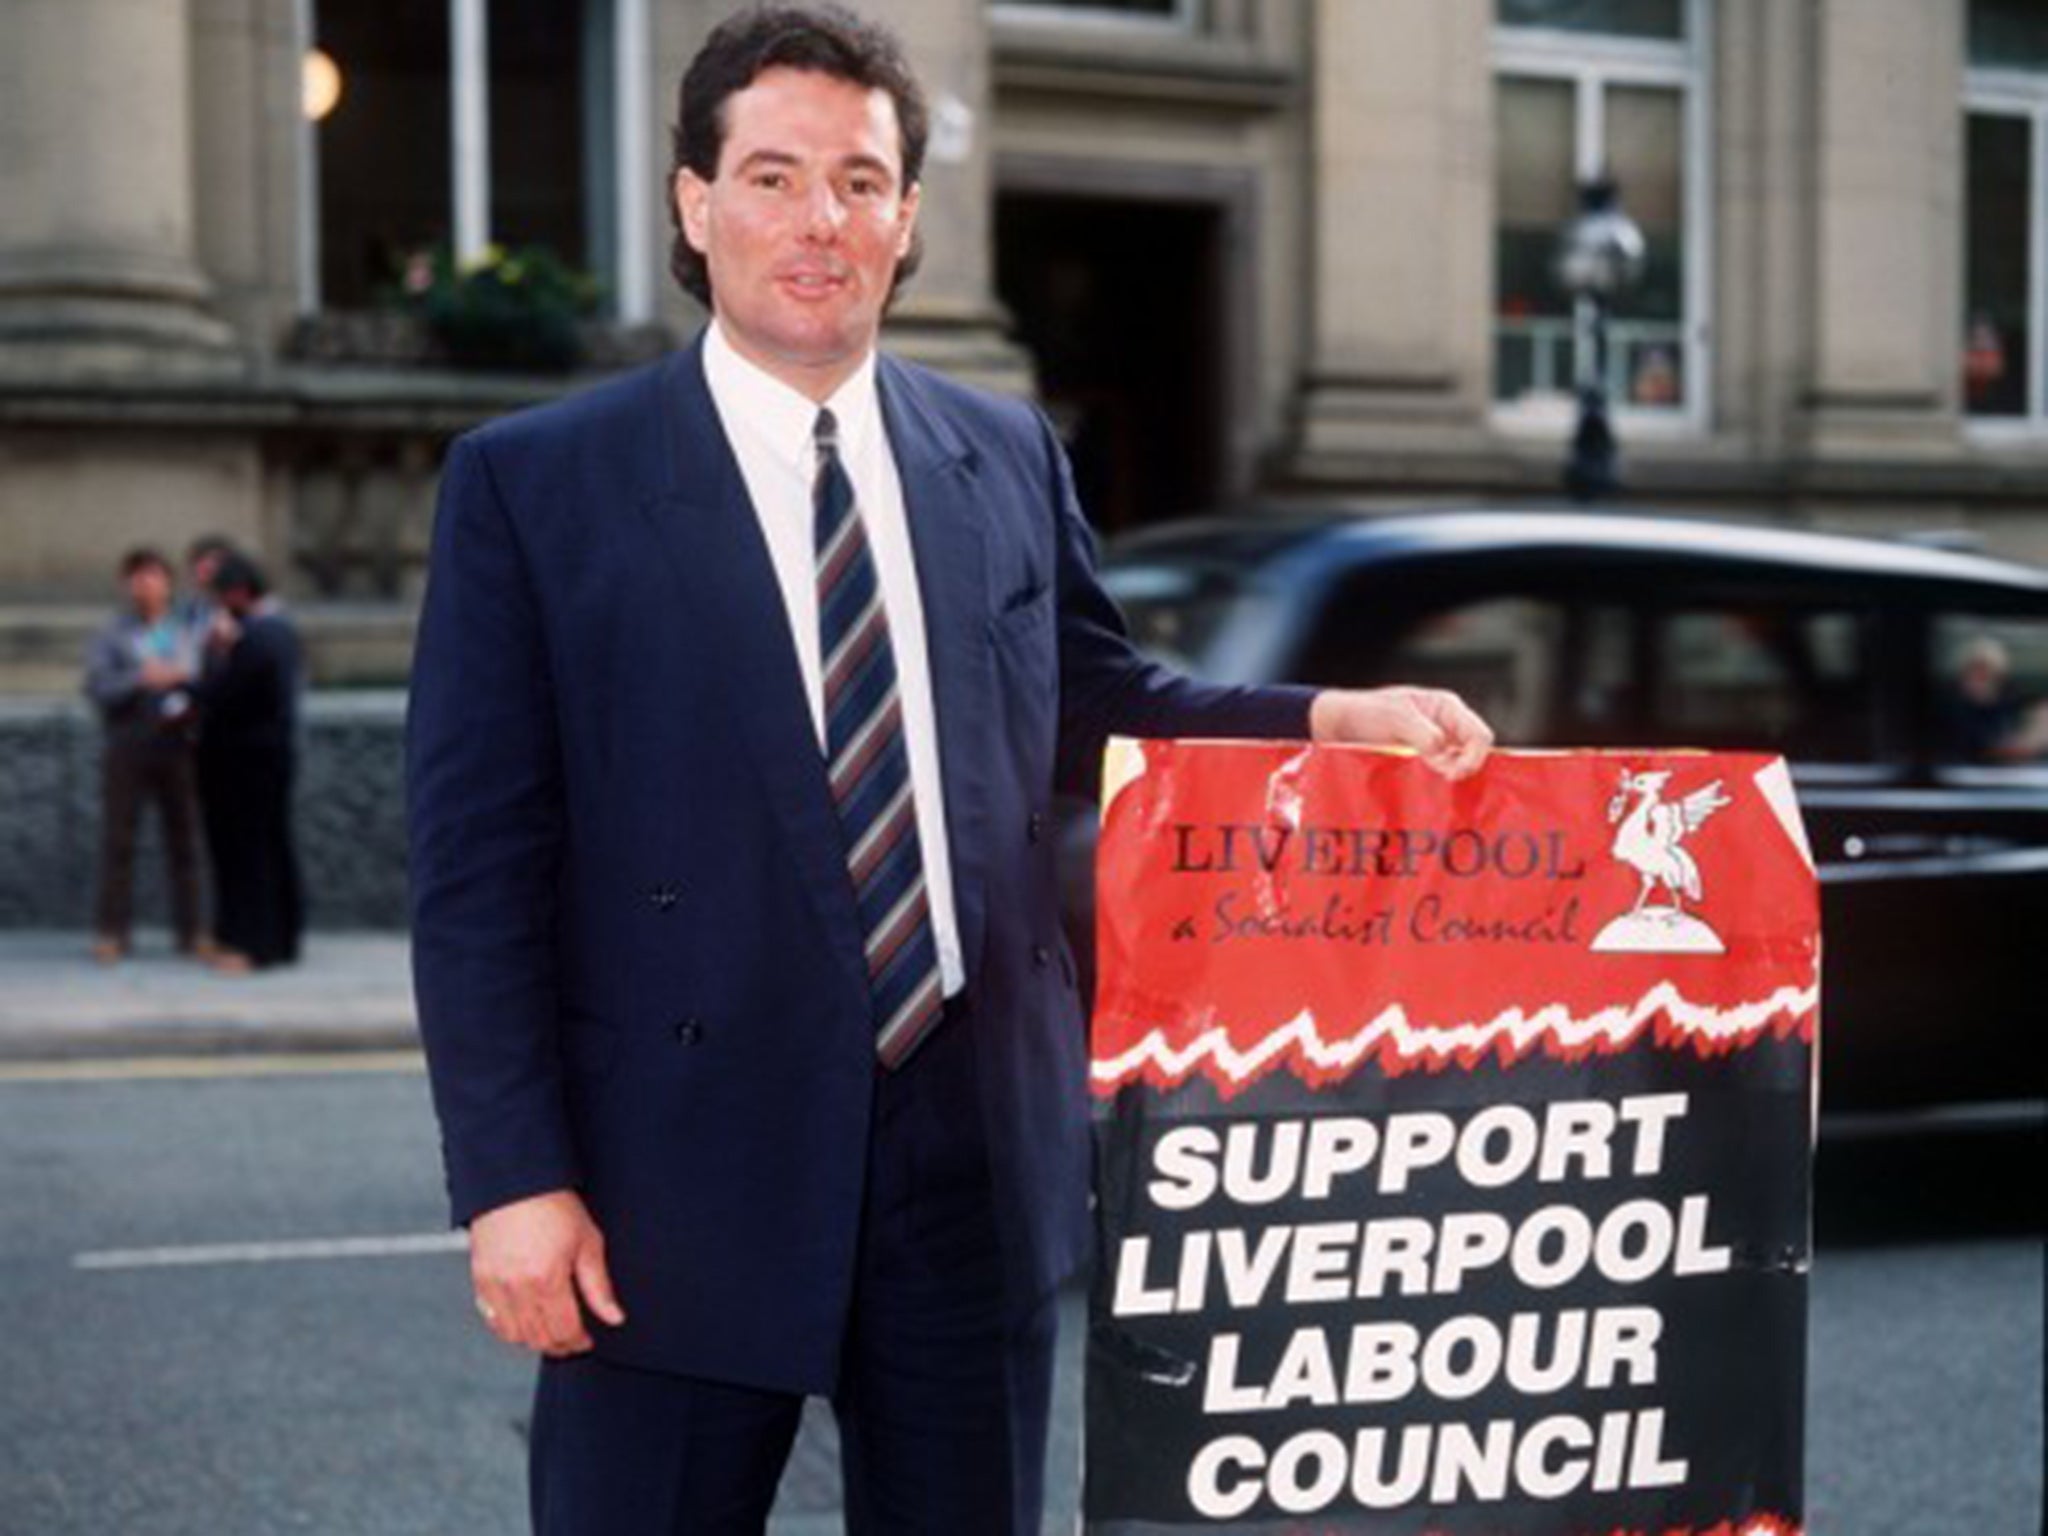 Derek Hatton Liverpool city councelor holding plackard urging people to Support Liverpool Labour Council